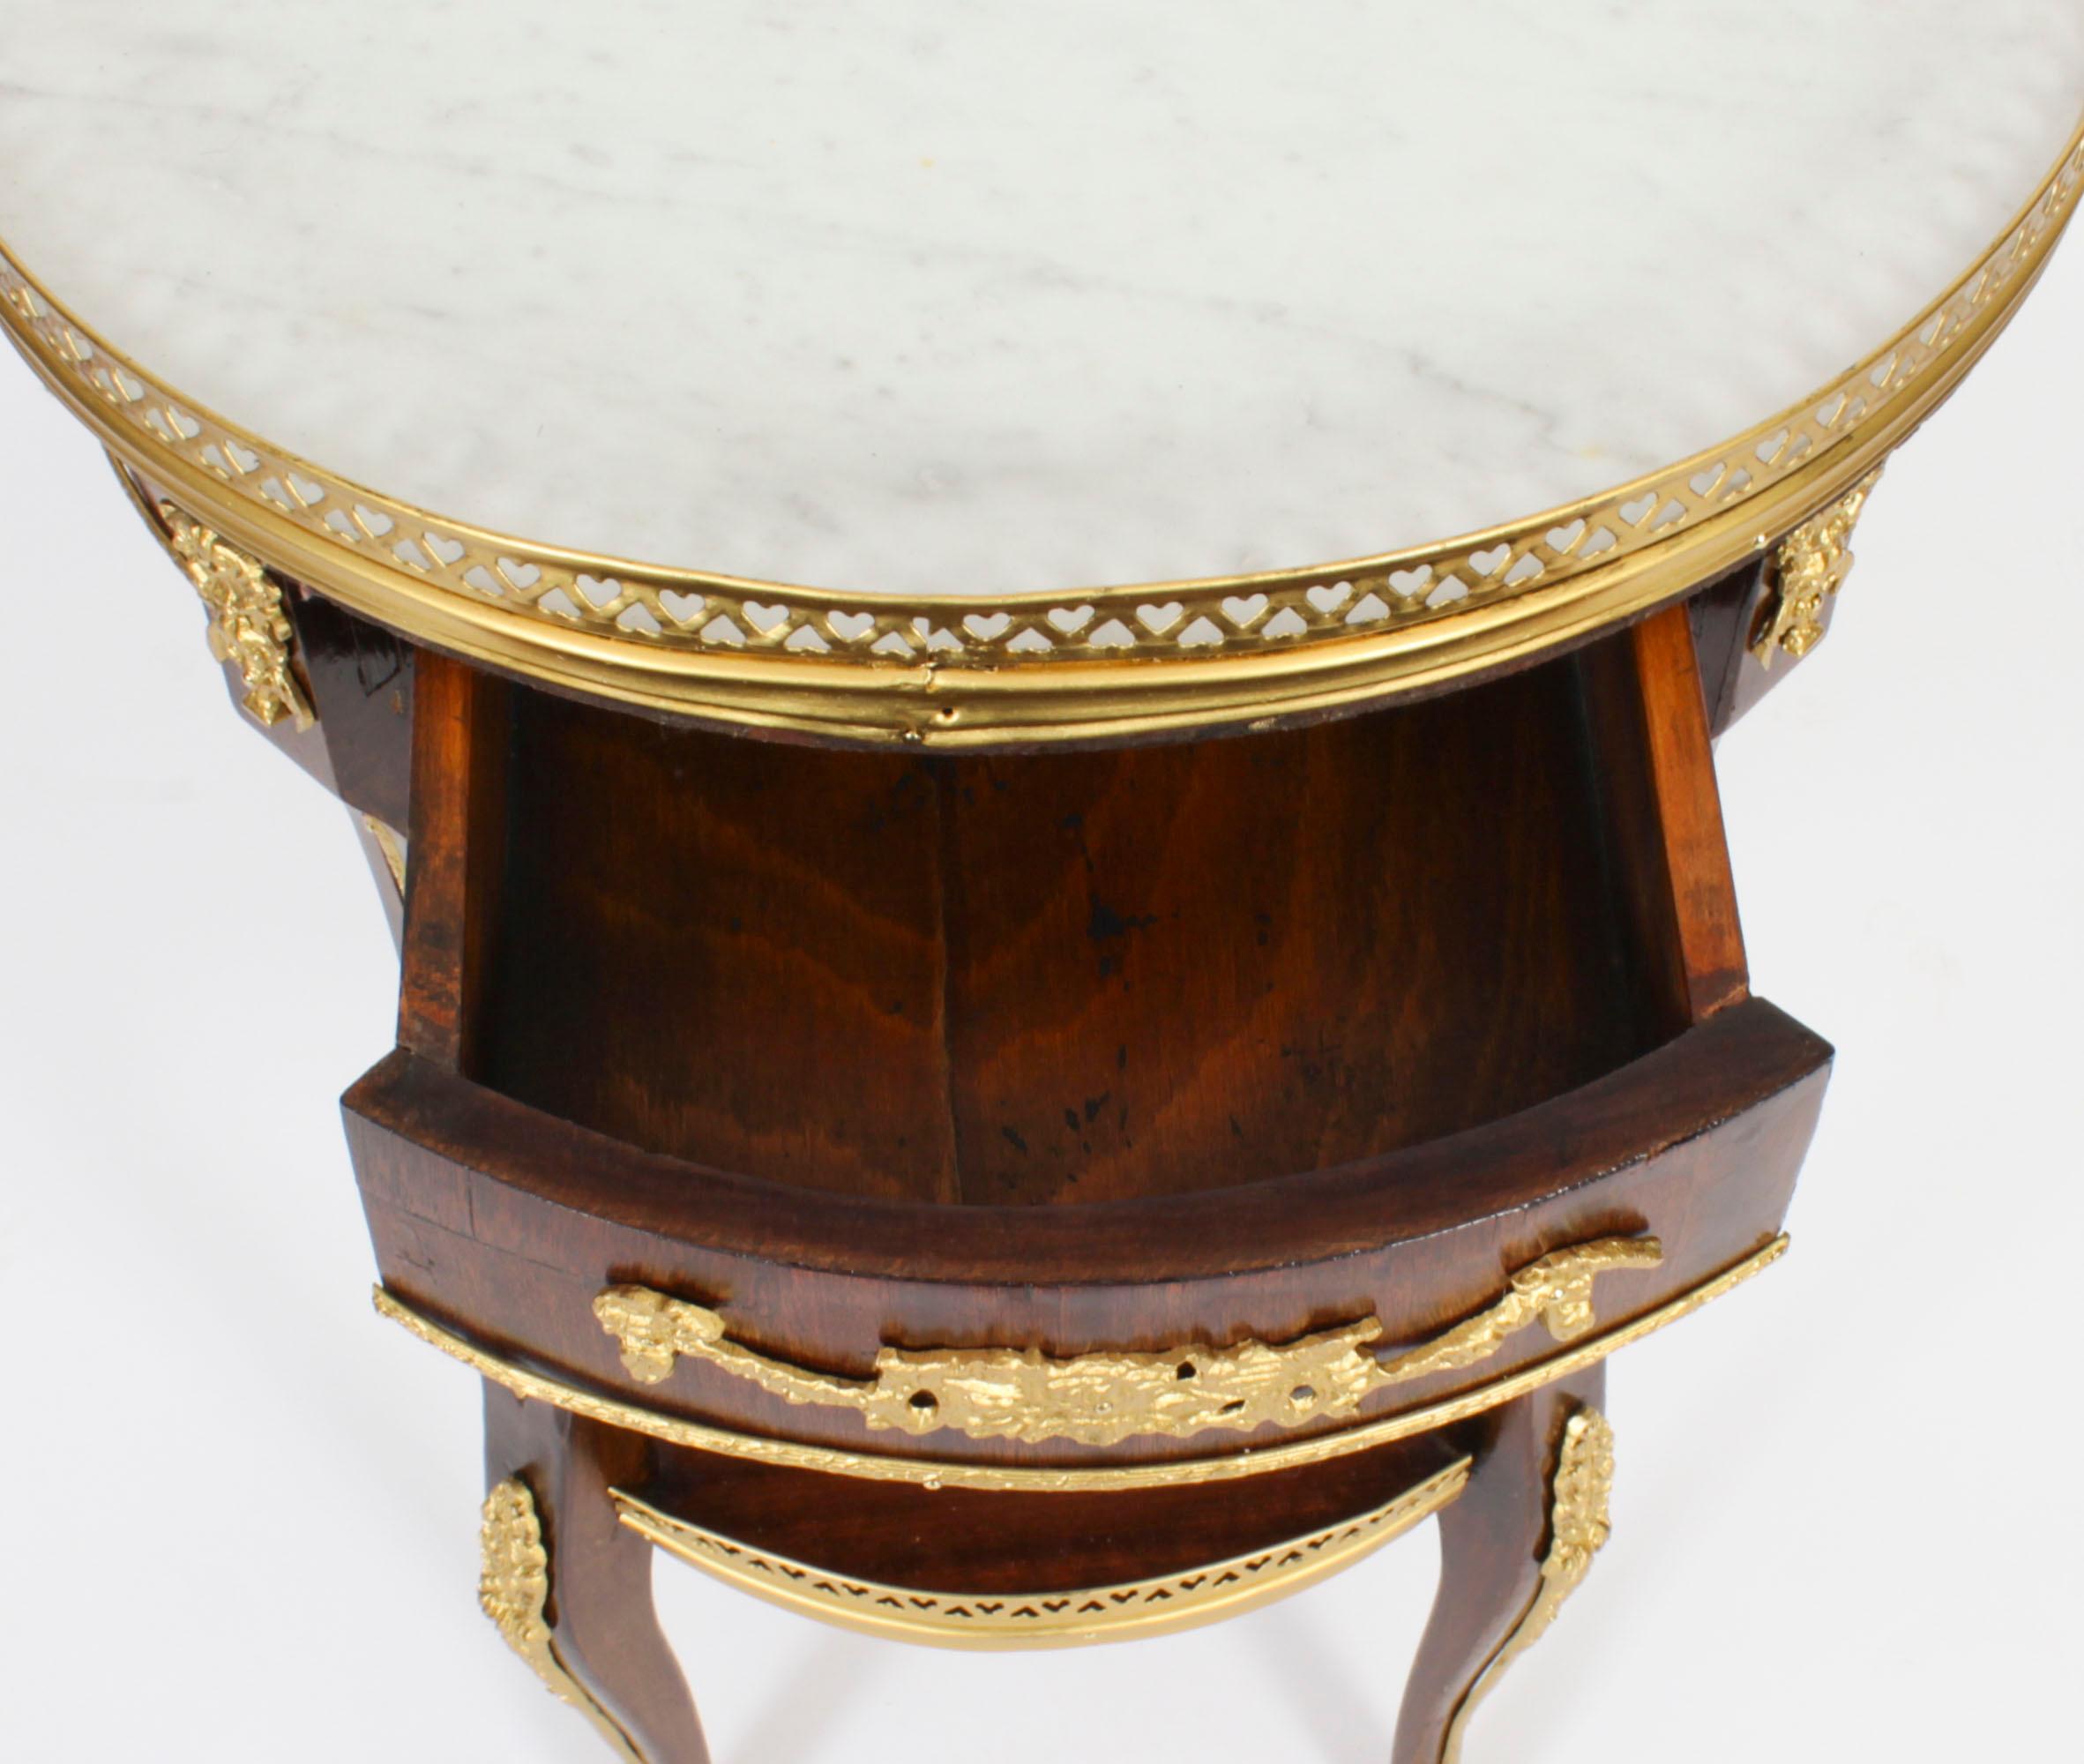 Antique French Empire Marble & Ormolu Occasional Table, 19th Century For Sale 7